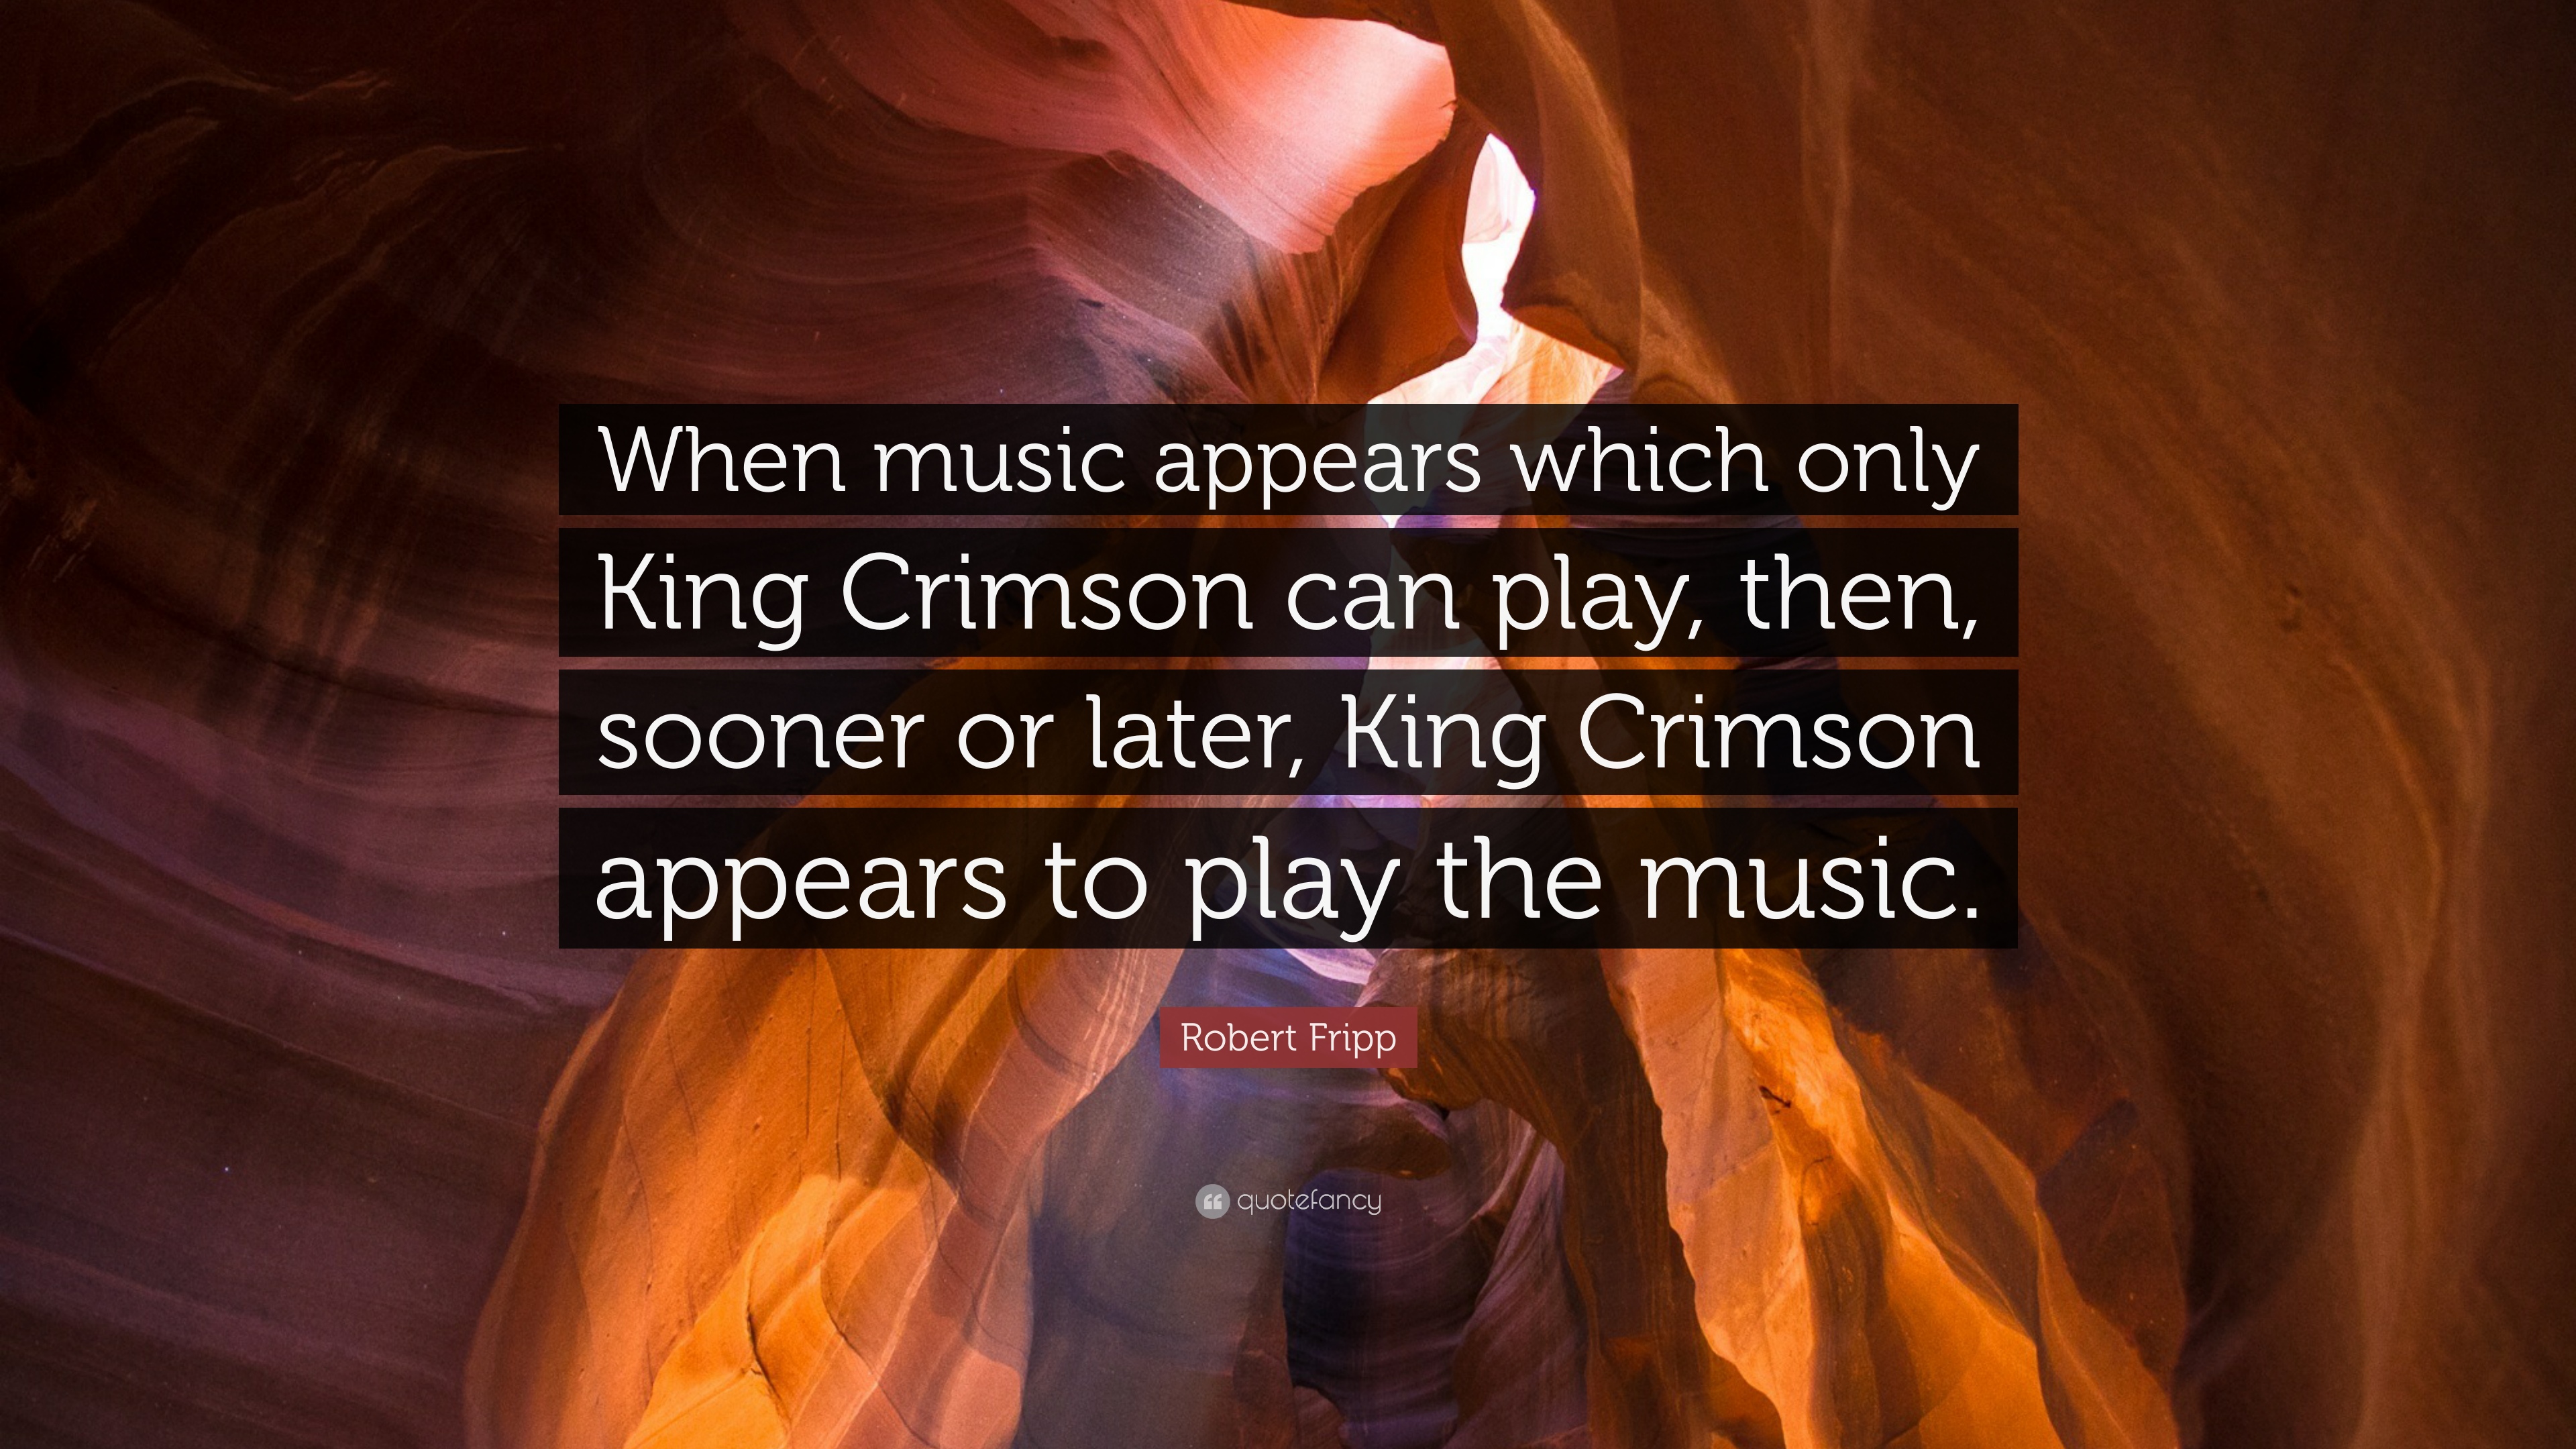 5 Robert Fripp Quotes About King Crimson